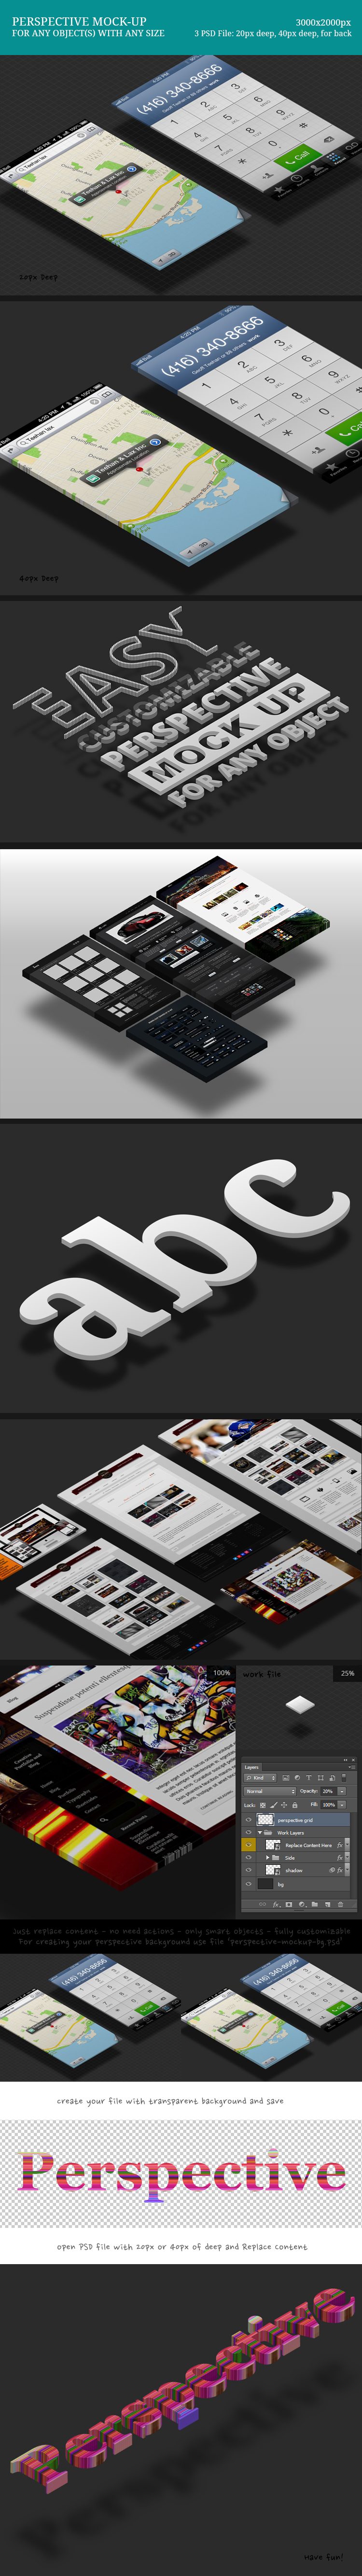 perspective mock-up mock-up smart object any type any size customizable iphone iPad Web text